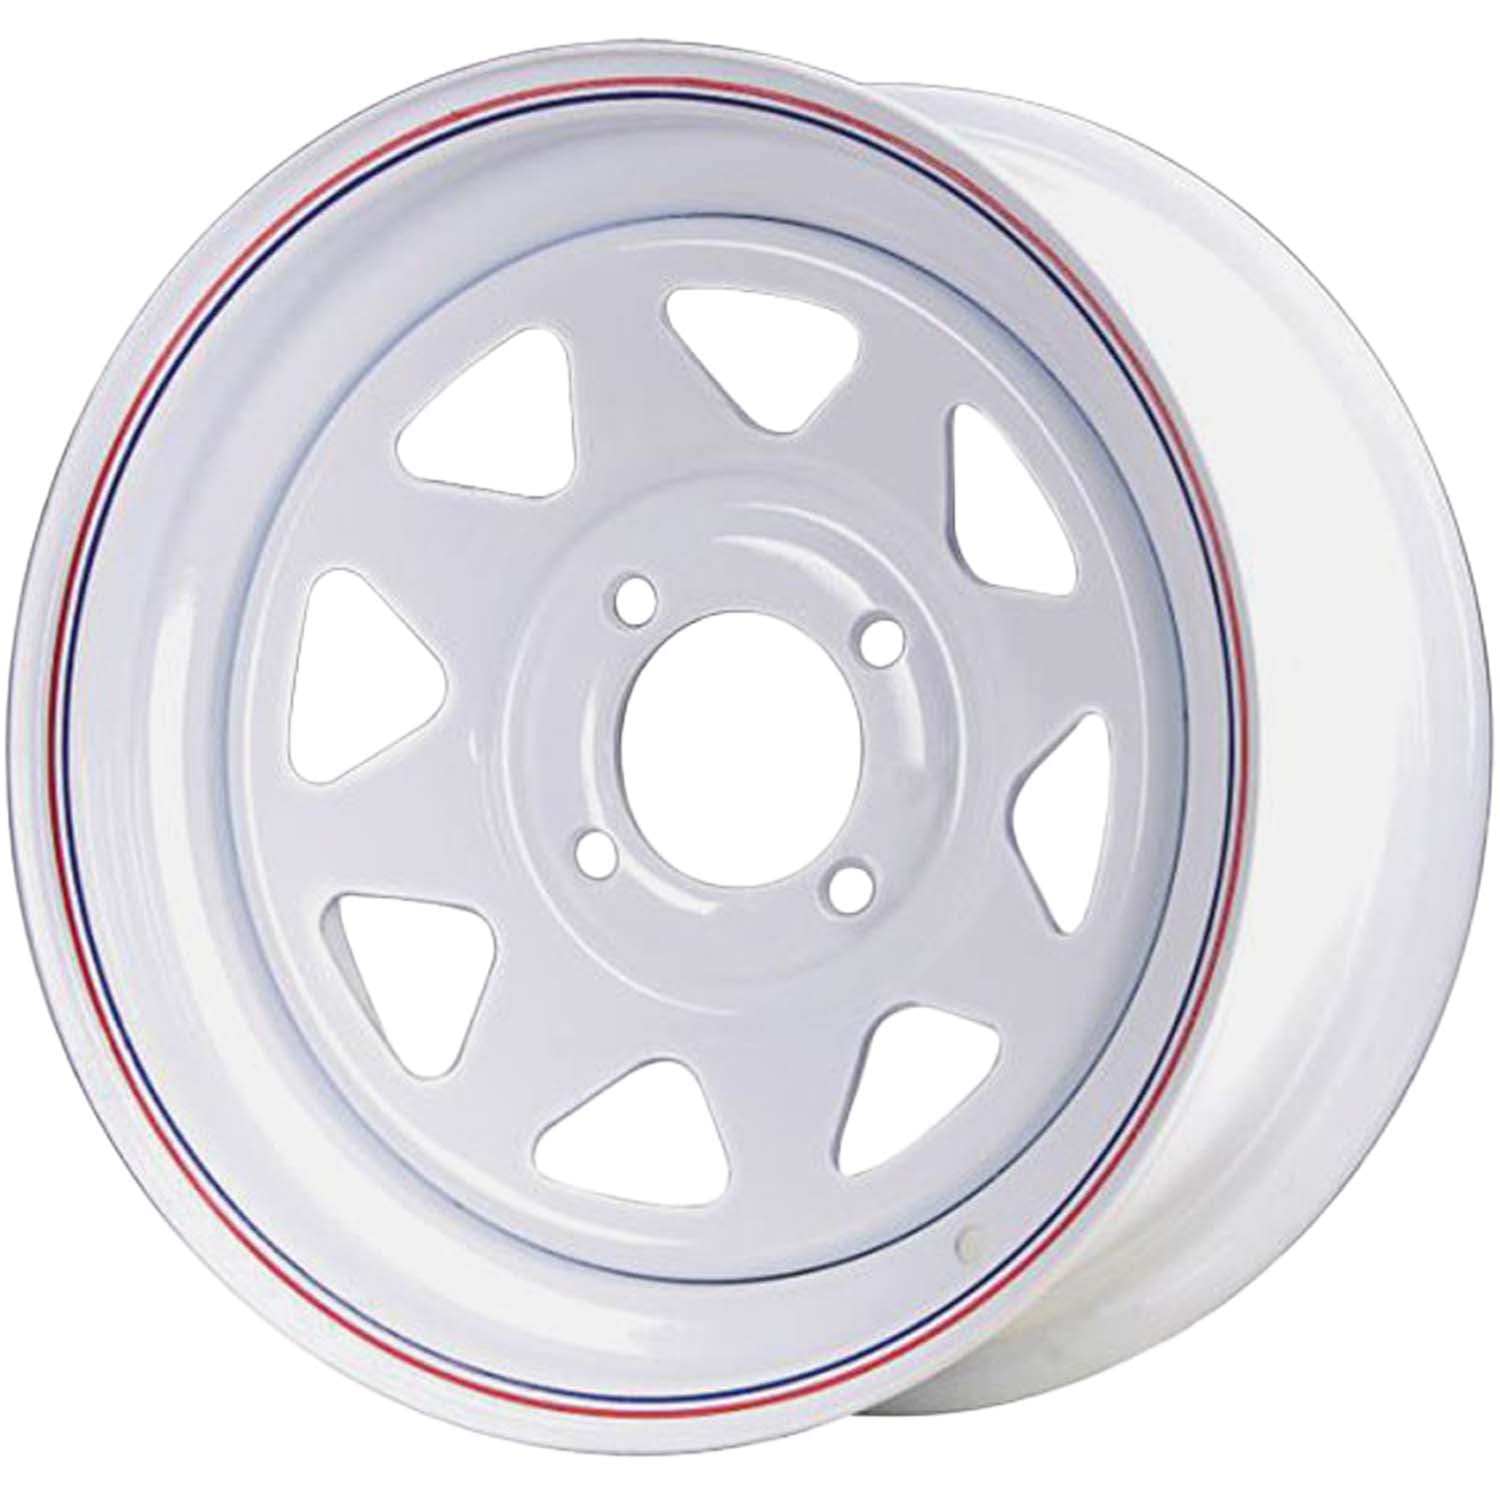 12x4 4 On 4 Spoked Steel Trailer Wheel - White with Pin Stripes